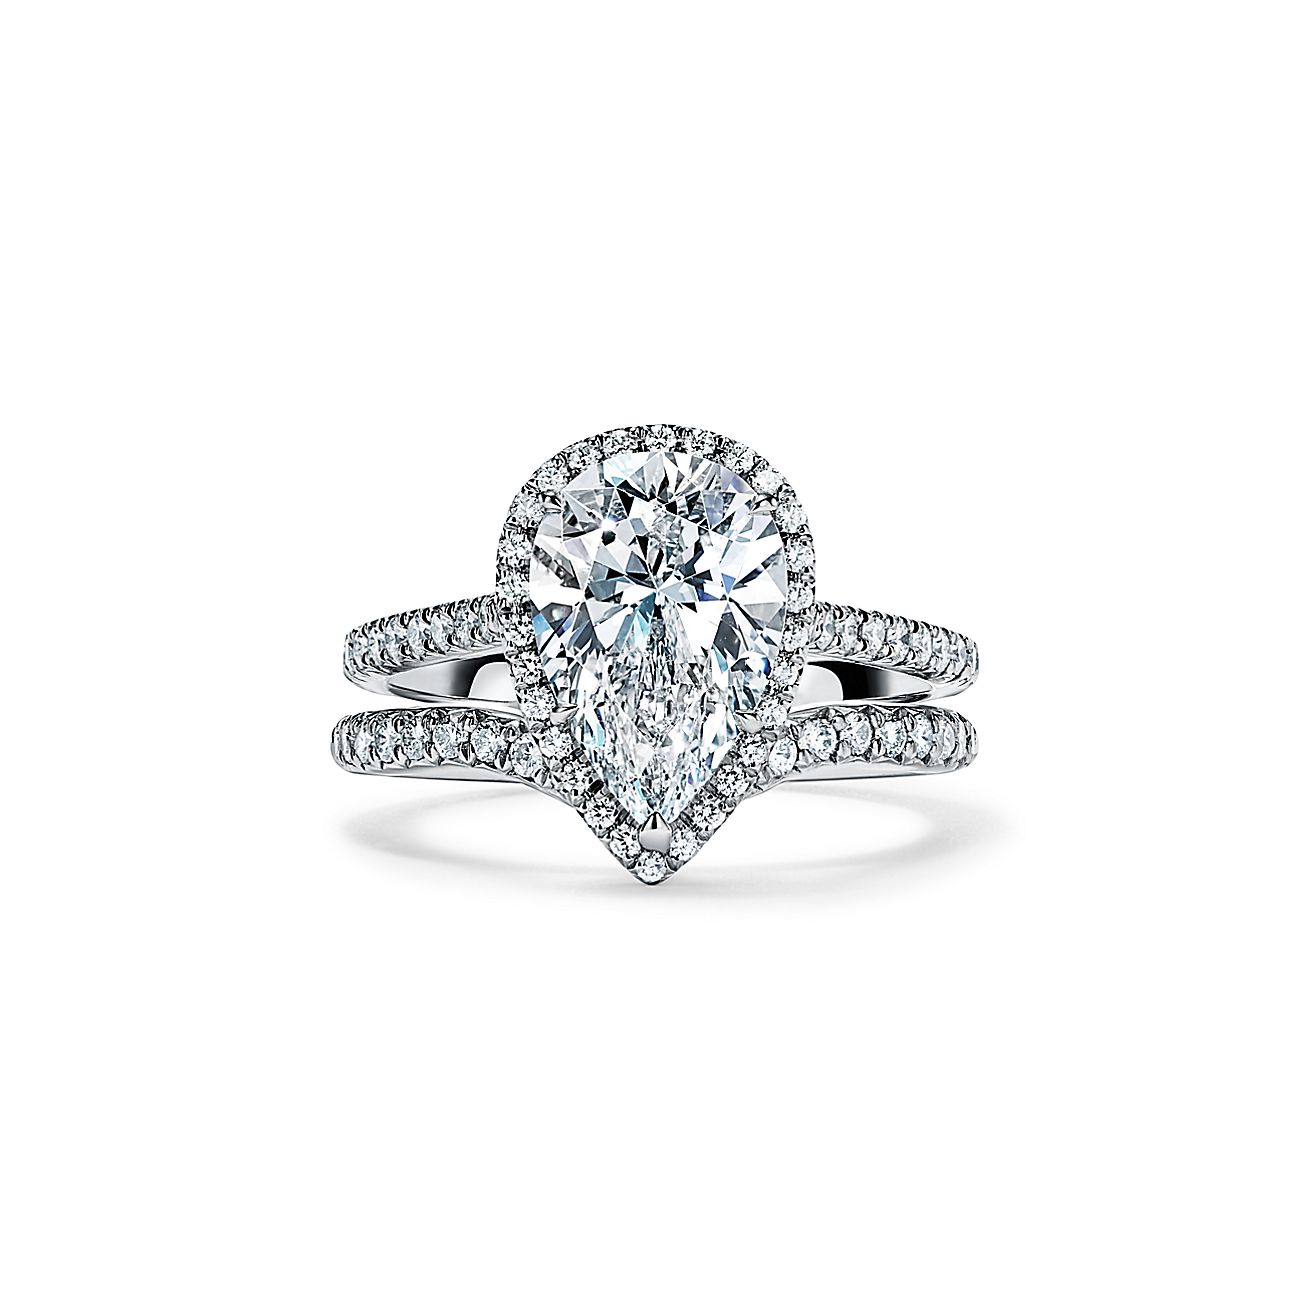 Platinum Pear Shaped Diamond Halo Engagement Ring with Tapered Diamond Band  - Dianna Rae Jewelry